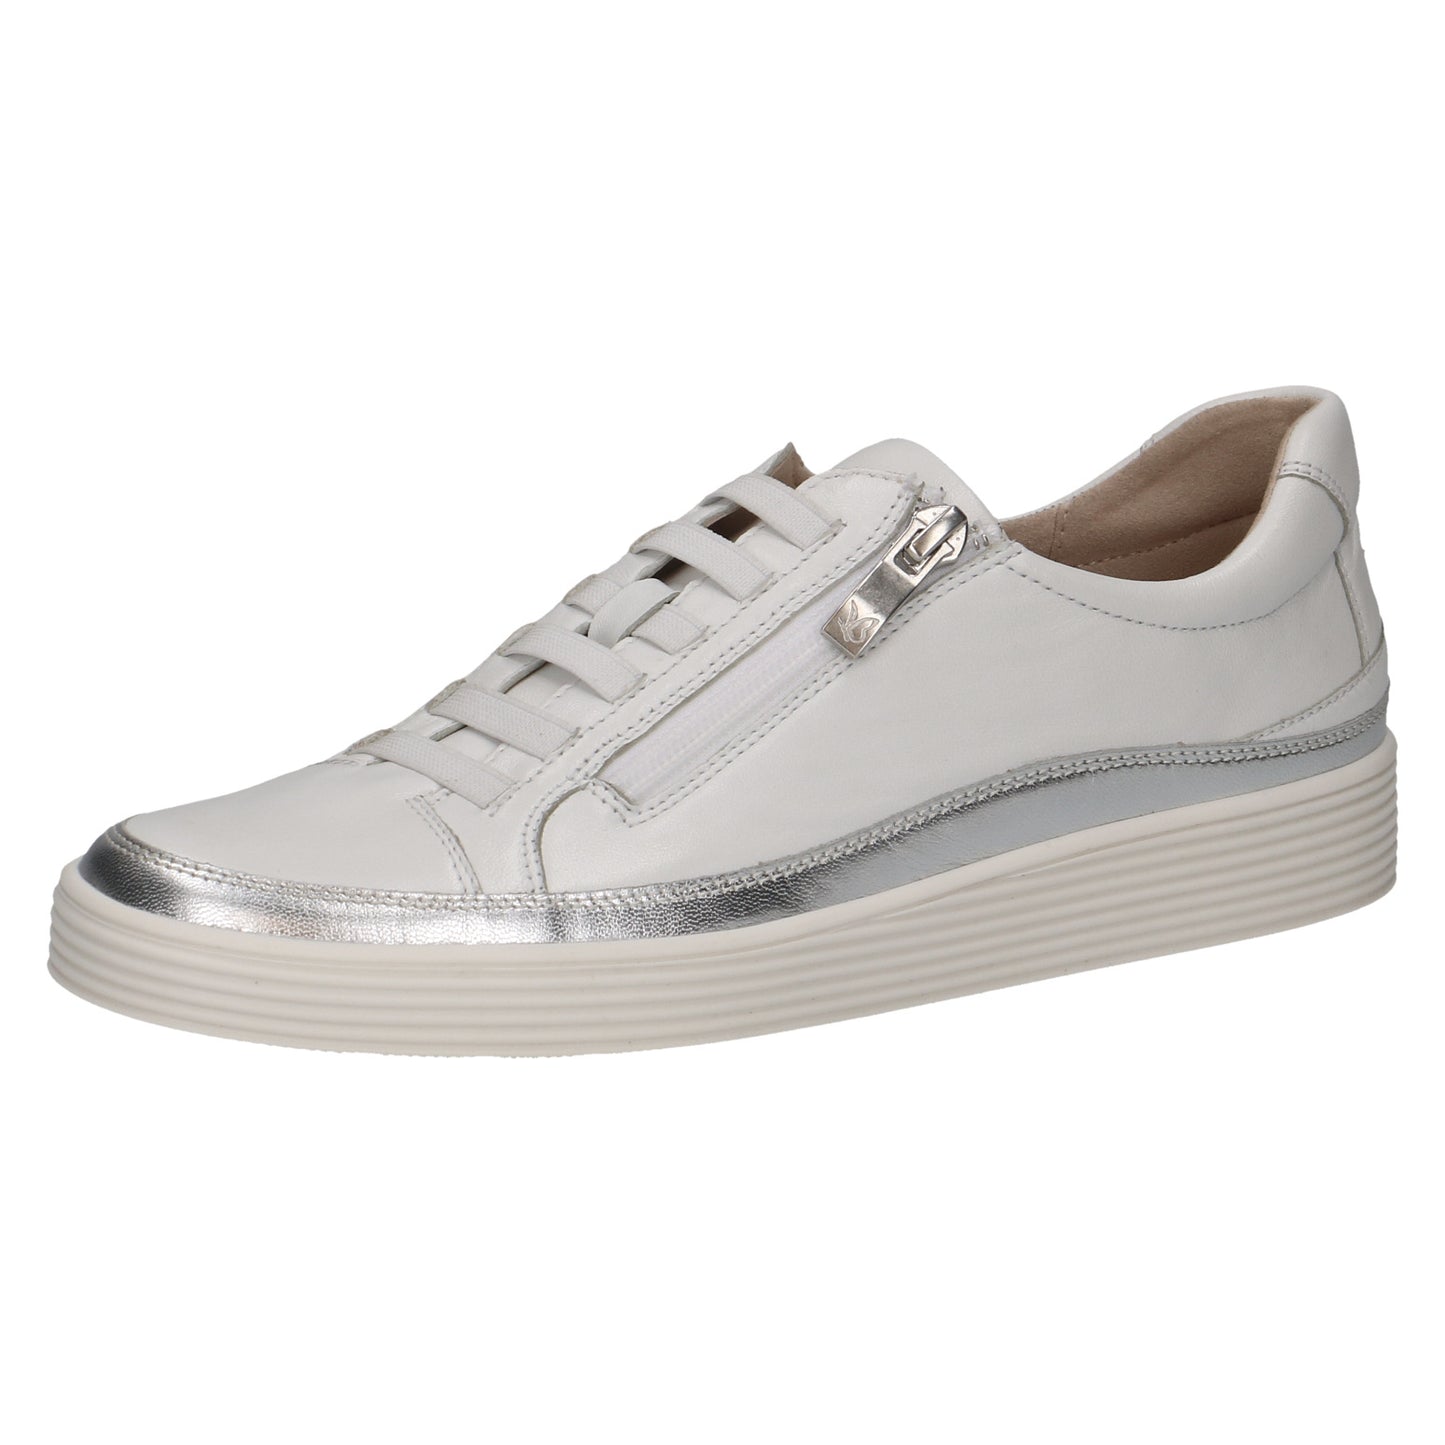 Caprice - Ladies Shoes Trainers White, Sliver (1881)